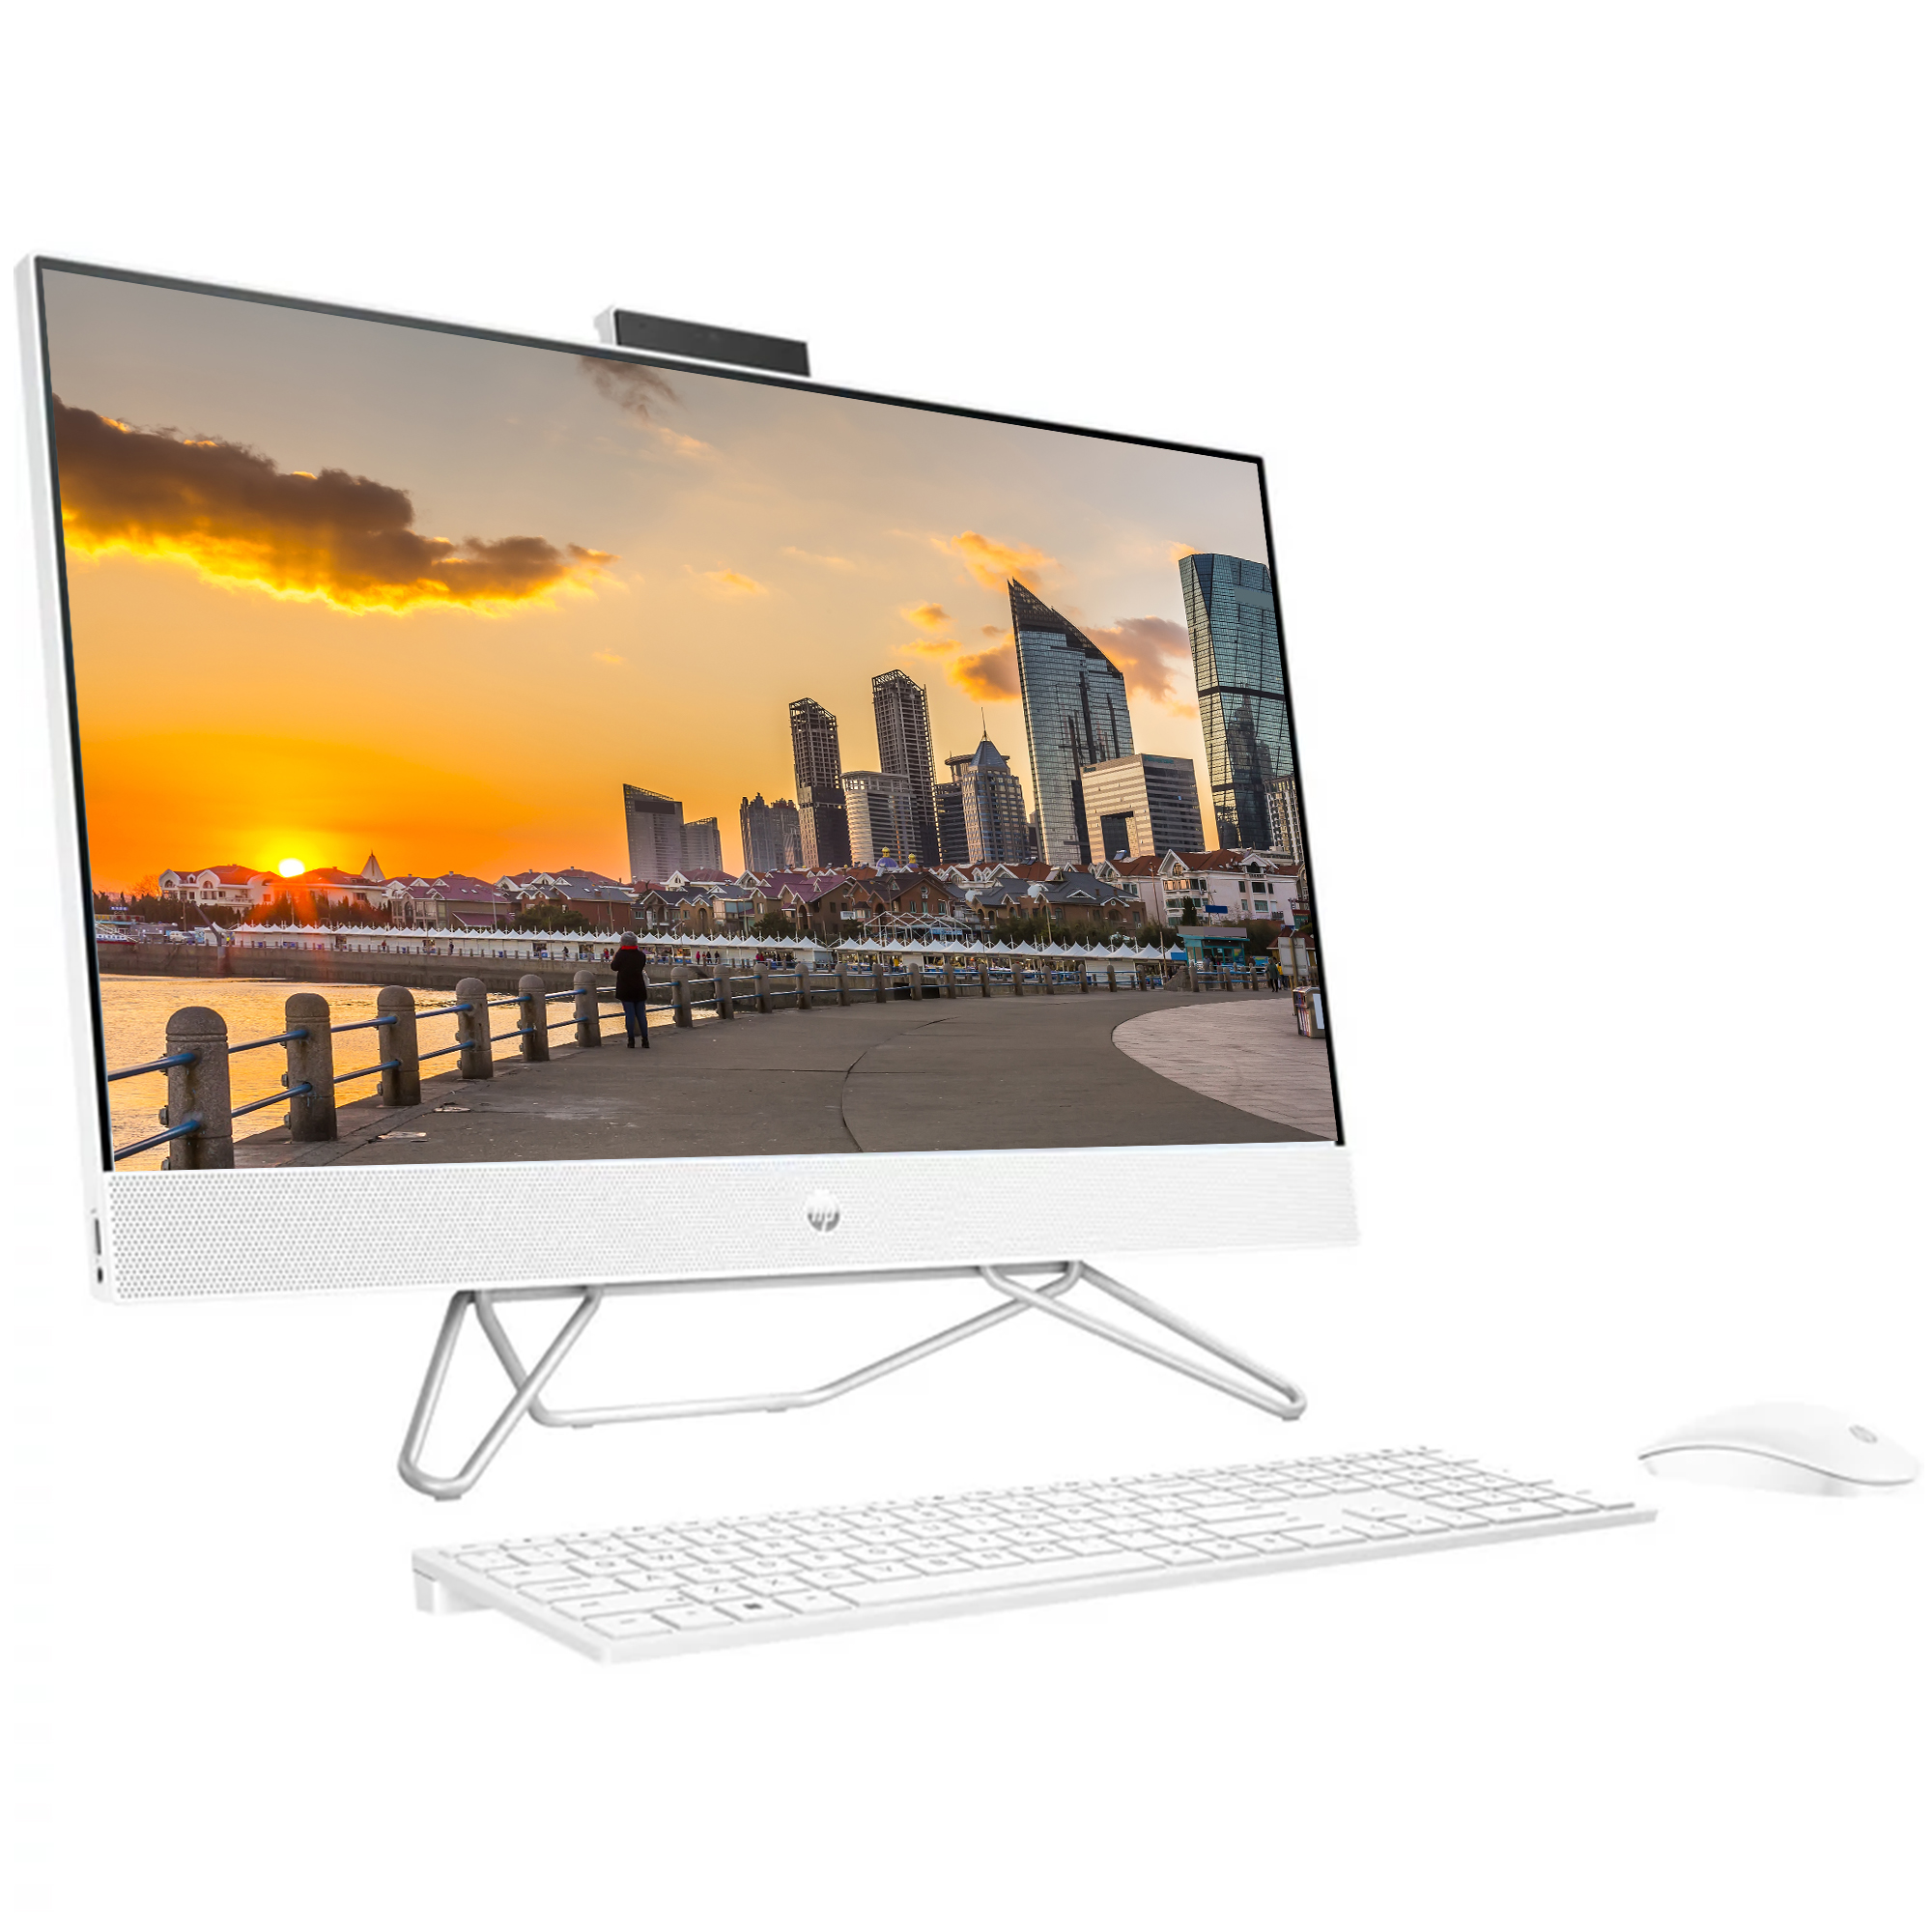 HP 27" FHD Touchscreen All-in-One [Windows 11 Pro] Business Desktop Computer PC, 8-Core AMD Ryzen 7 5700U(up to 4.3 GHz), 12GB RAM, 1TB PCIe SSD, Wi-Fi, Bluetooth, Wired Keyboard & Mouse - image 2 of 6